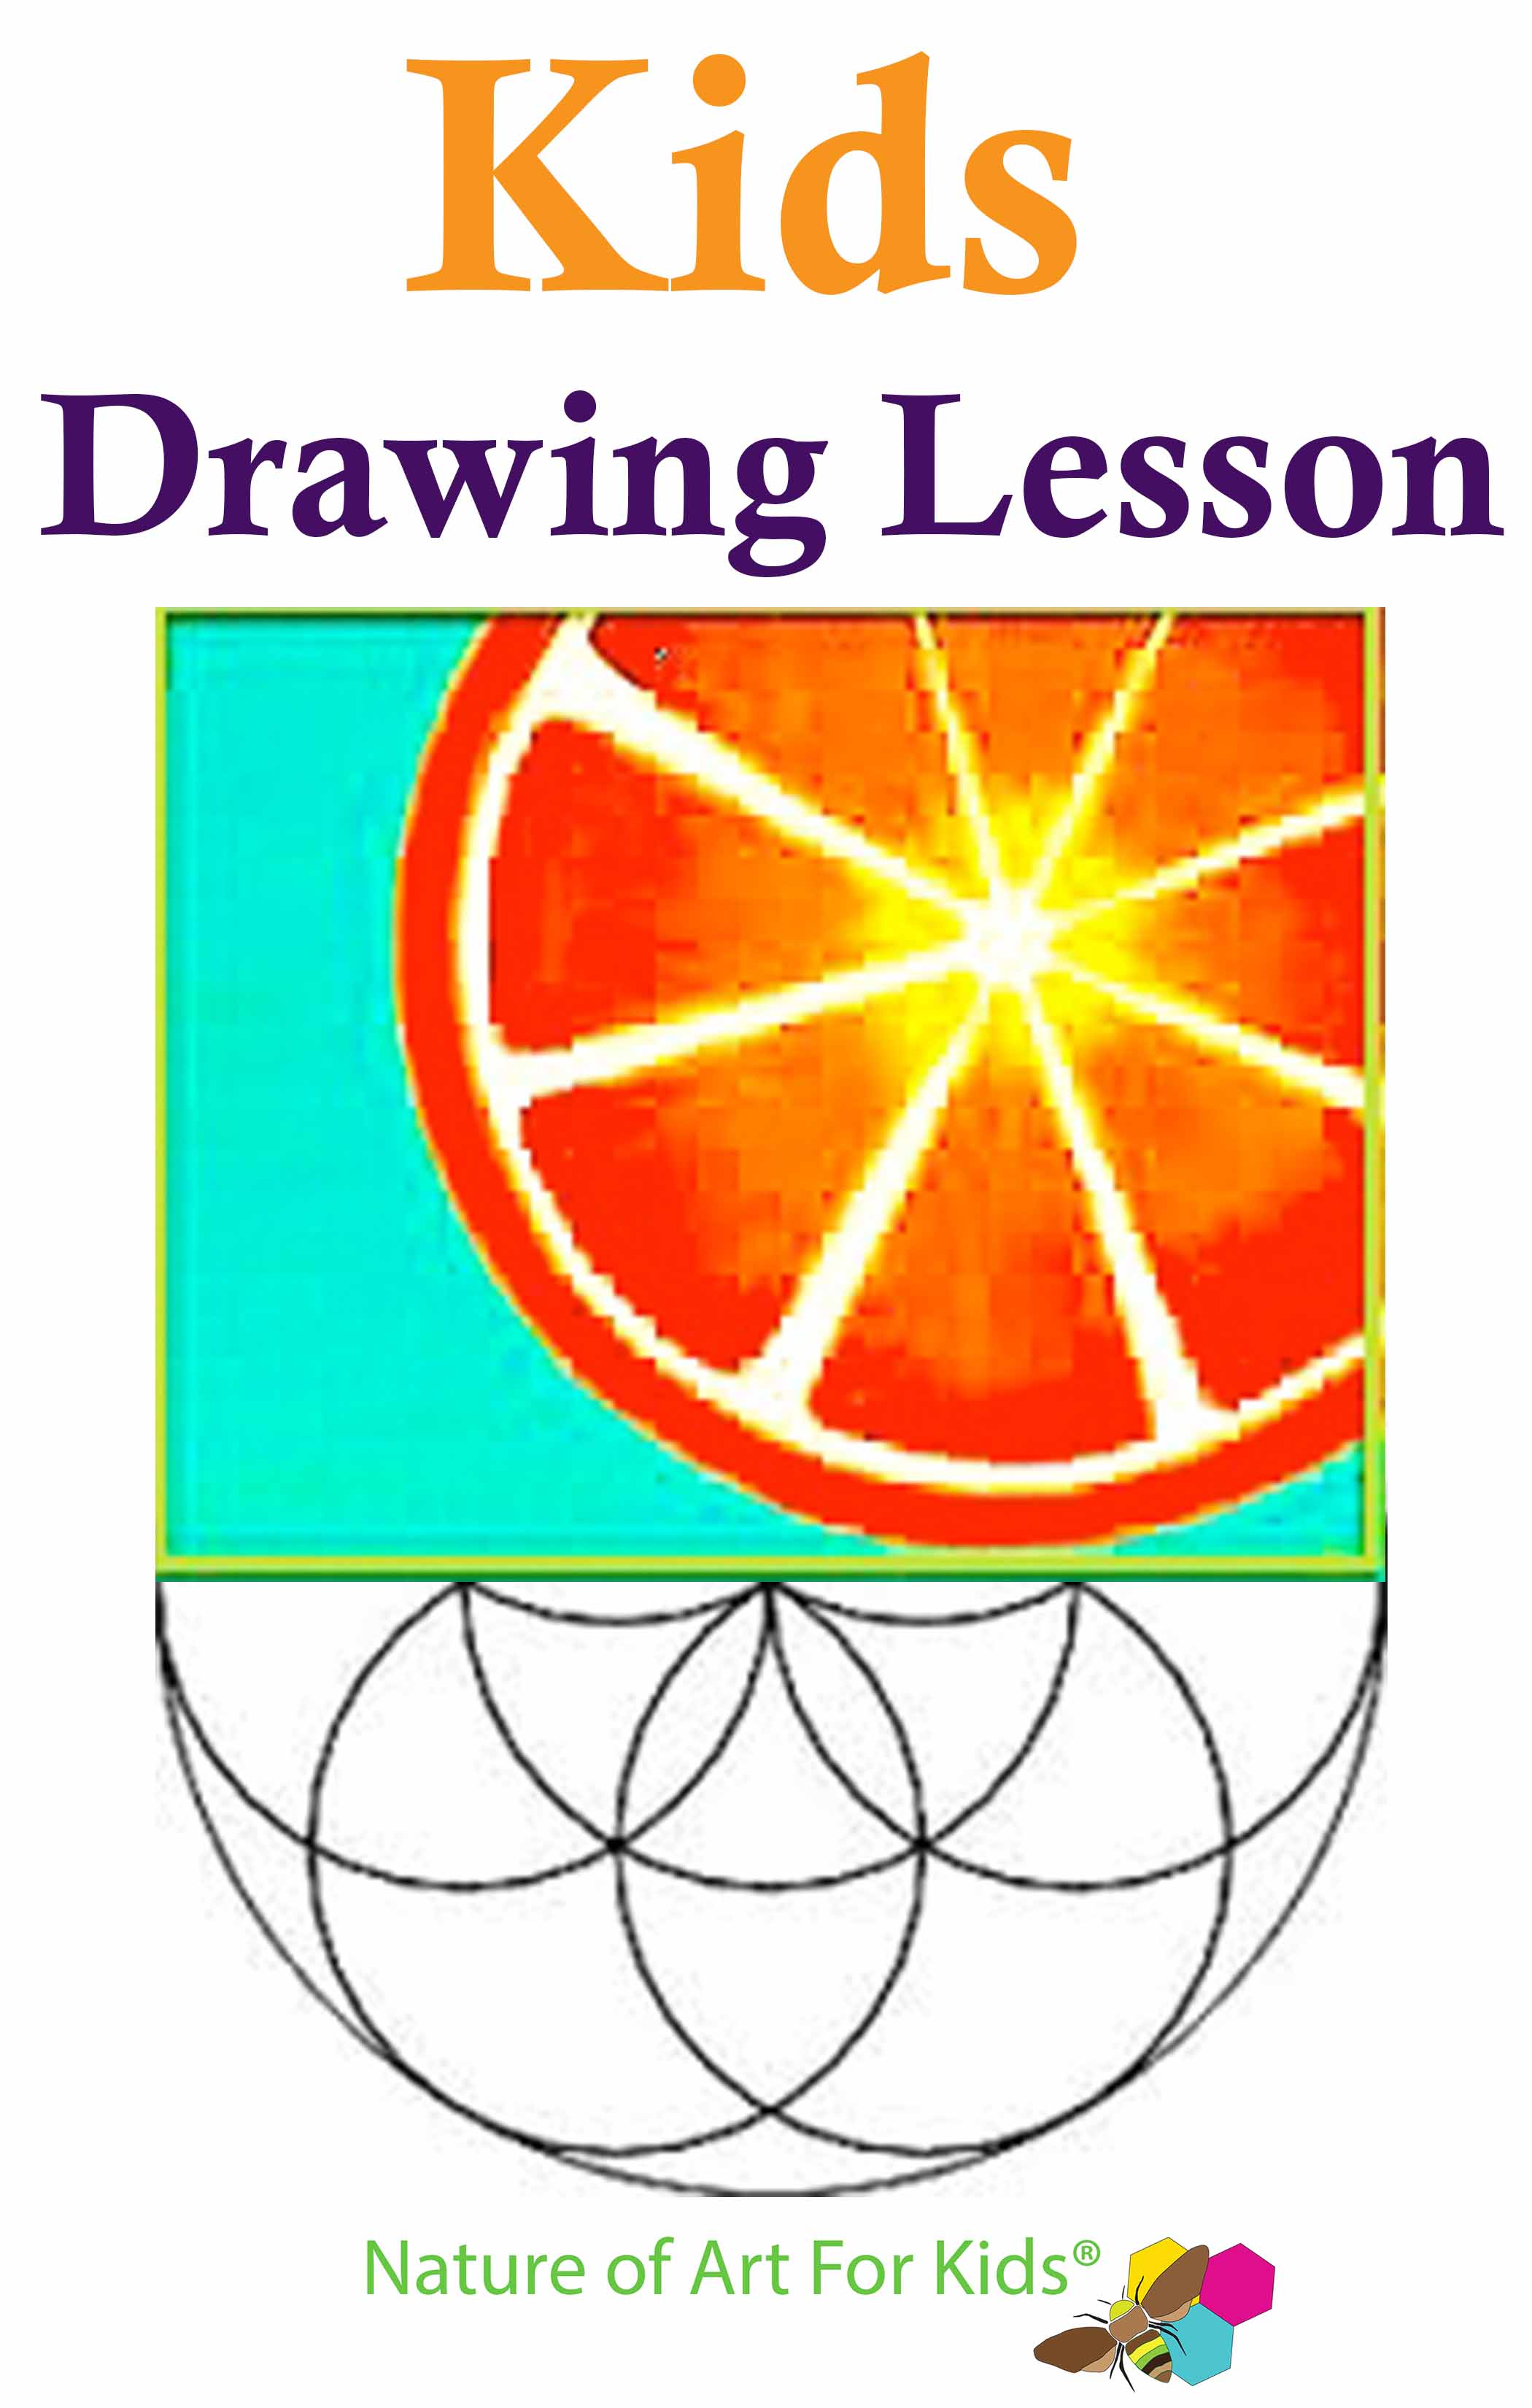 How to draw rectangular shape objects, easy drawings